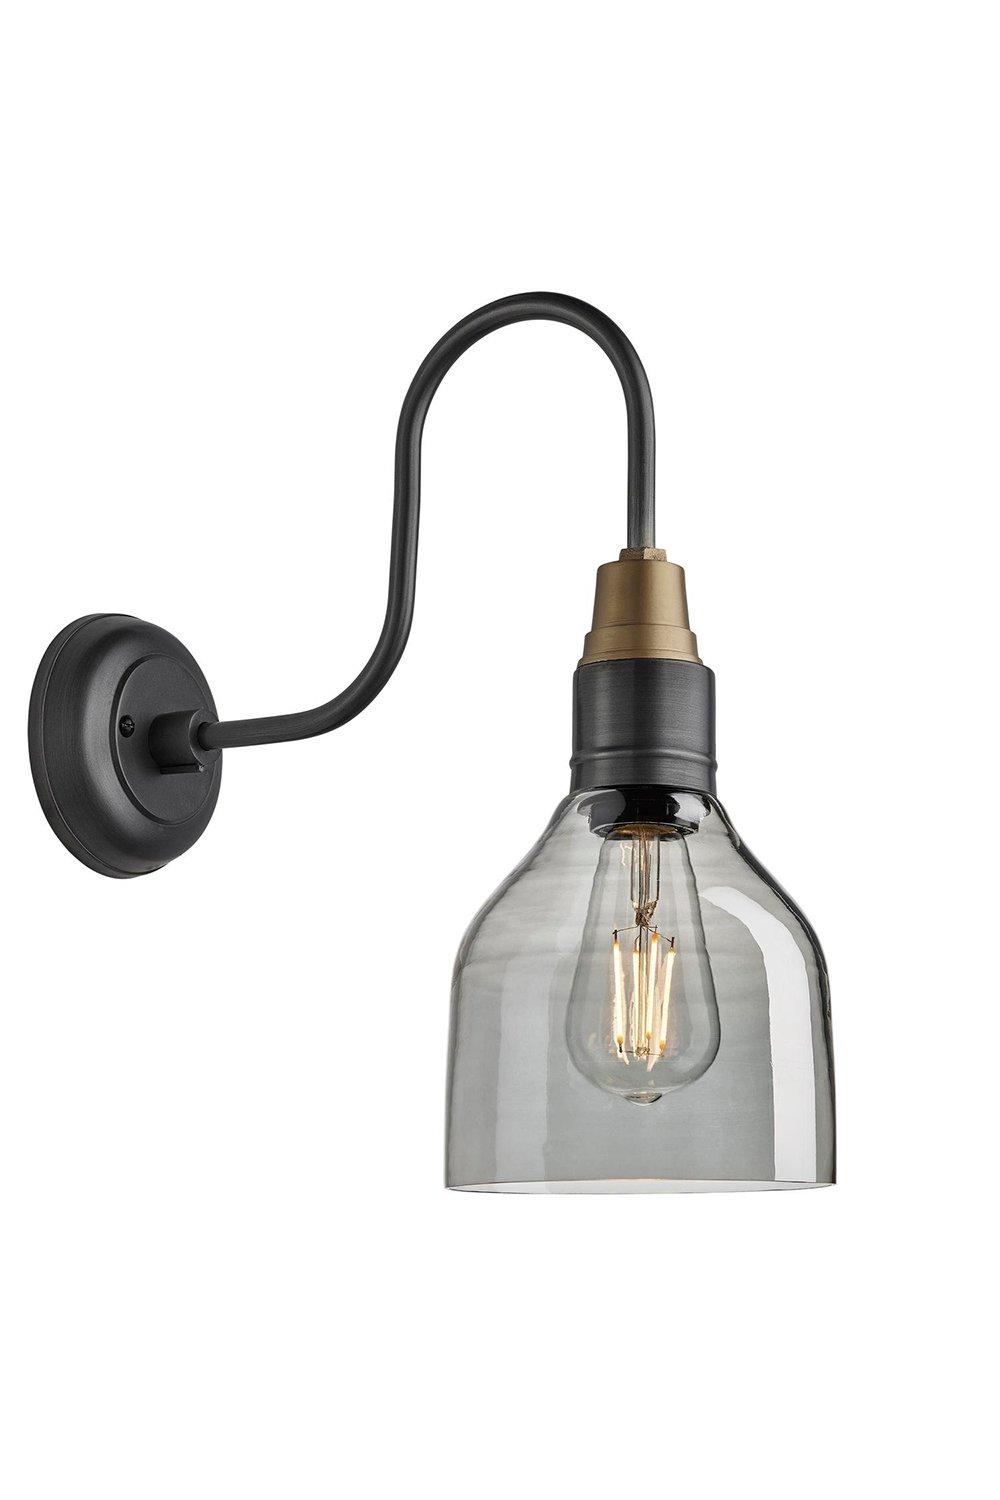 Swan Neck Tinted Glass Cone Wall Light, 6 Inch, Smoke Grey, Pewter Holder